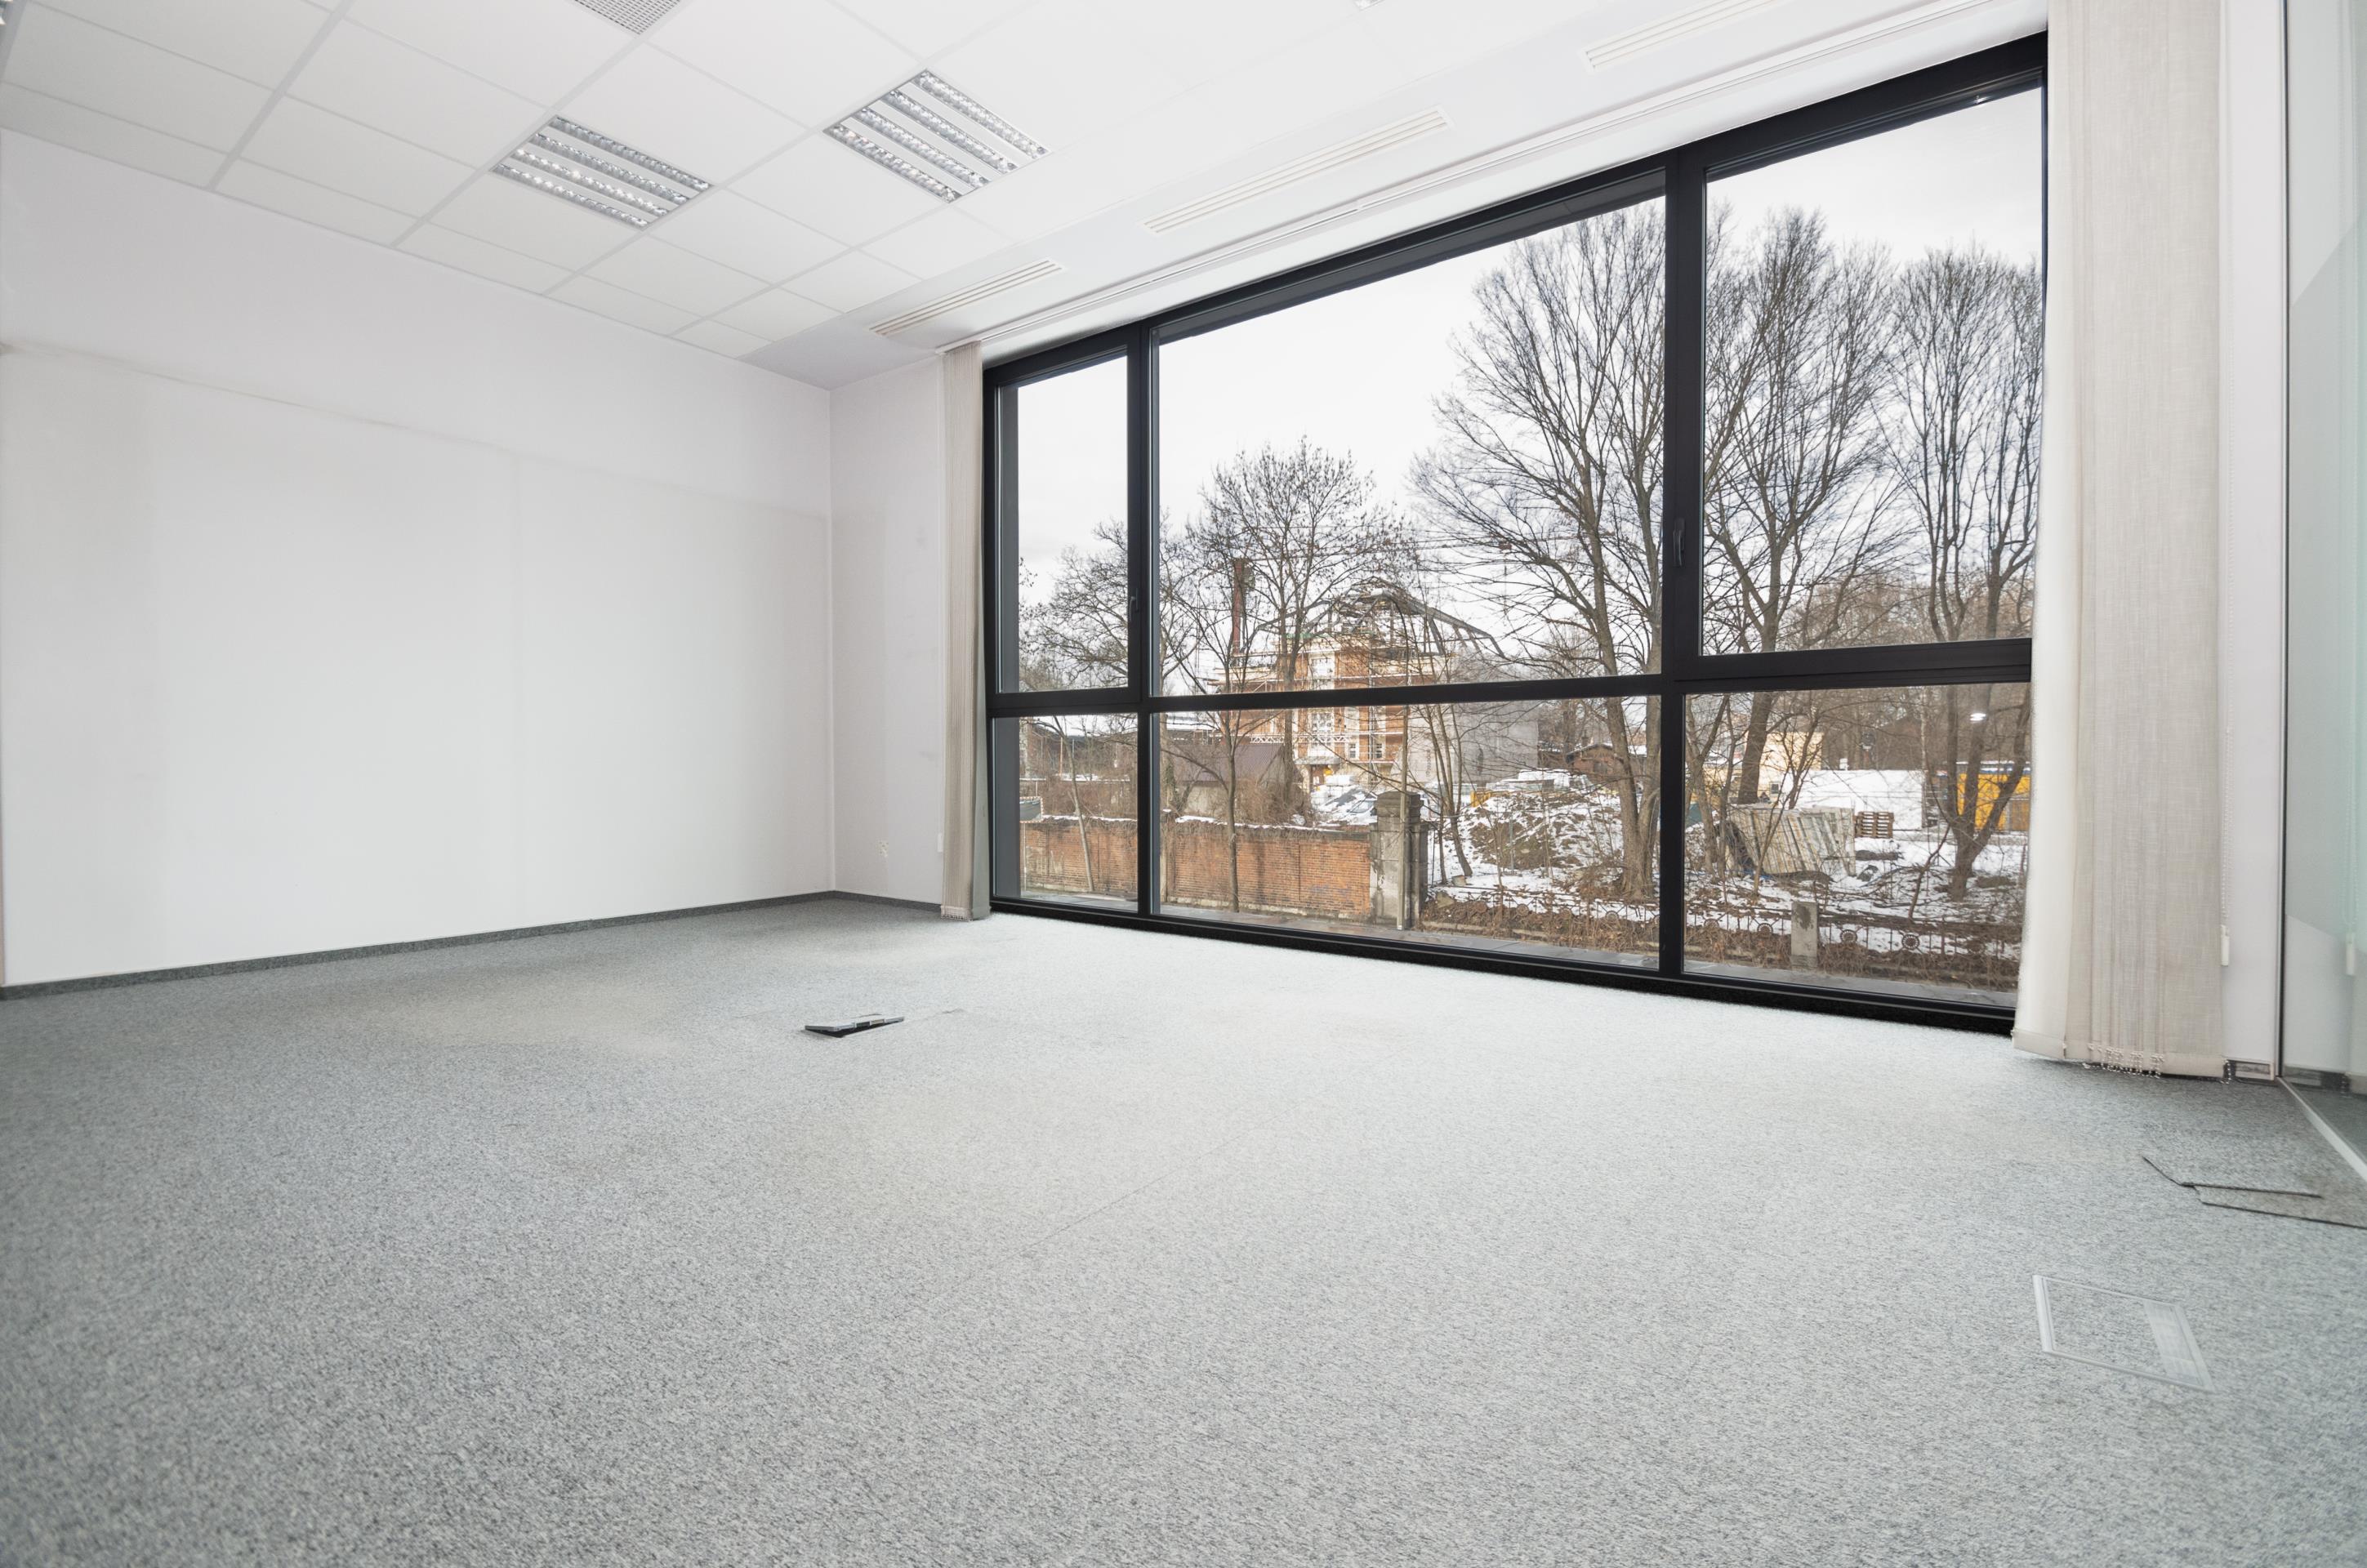 Office space located close to railway station